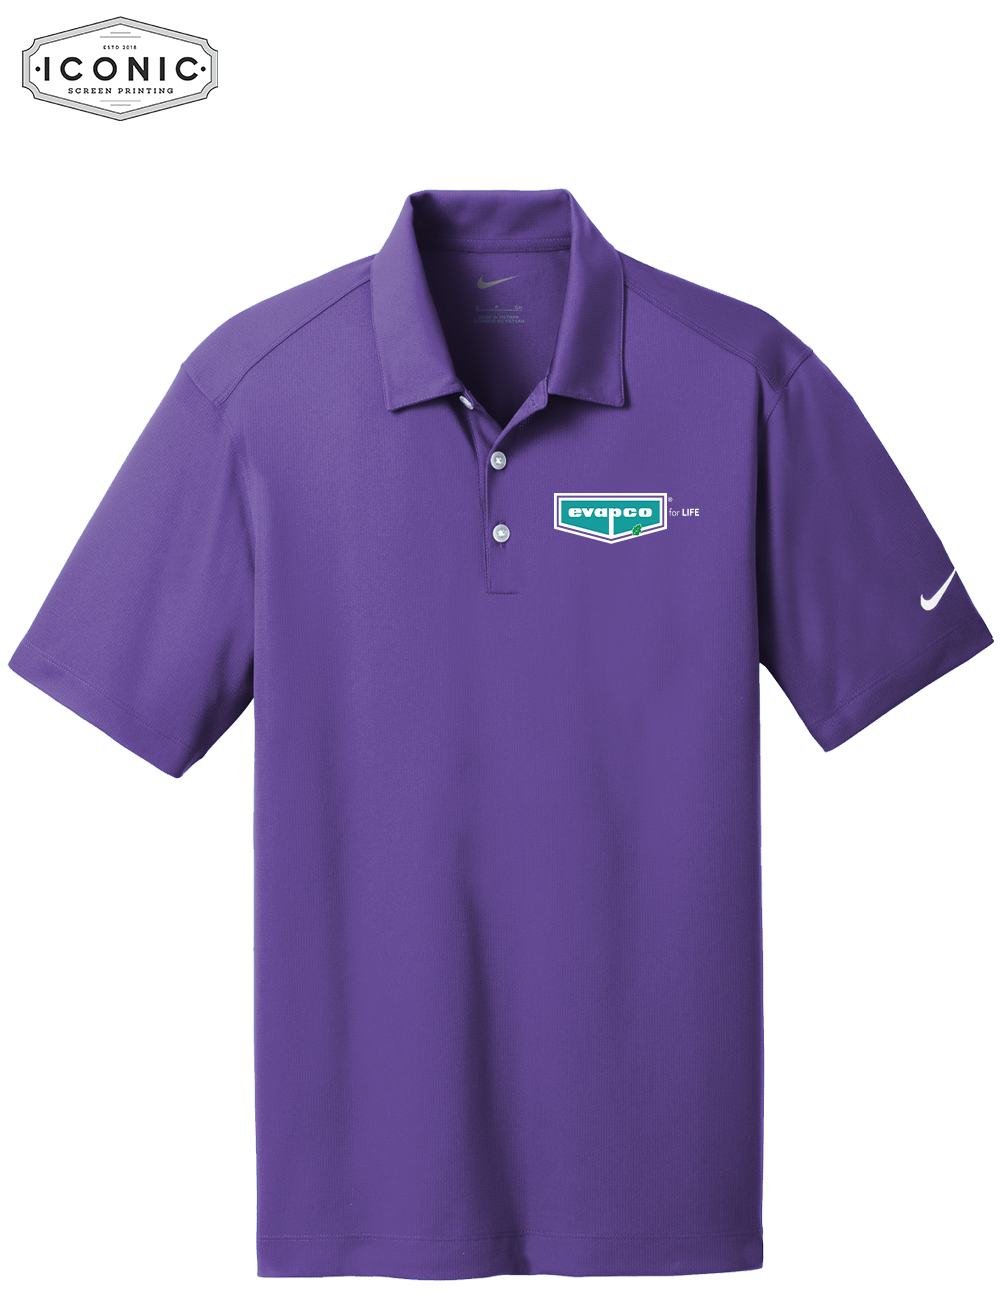 Evapco for Life - Nike Dri-FIT Vertical Mesh Polo - Select Mens or Womens Fit - Embroidery